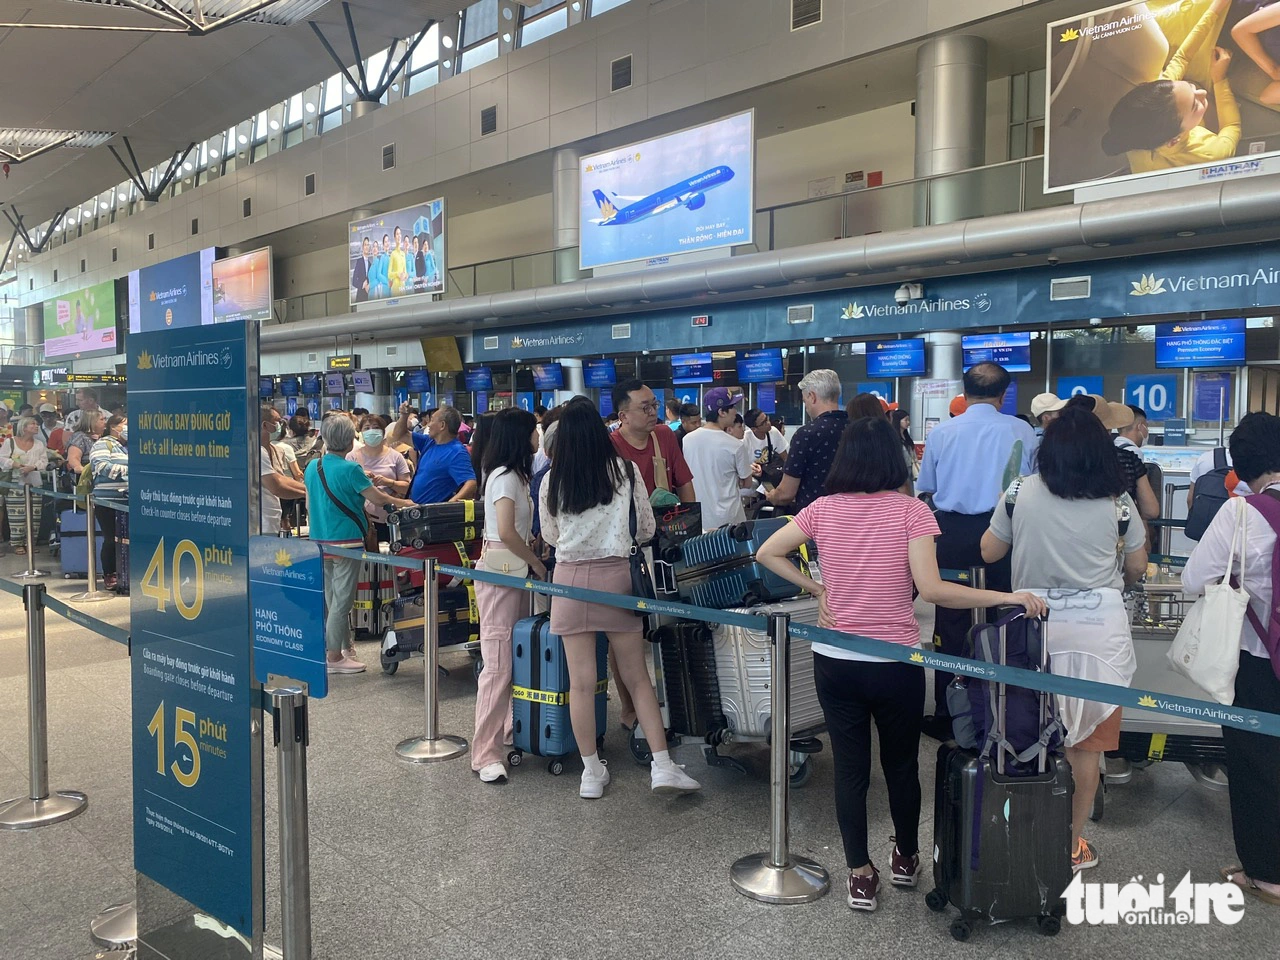 Overcrowding at Da Nang Int’l Airport due to increased flights, schedule changes